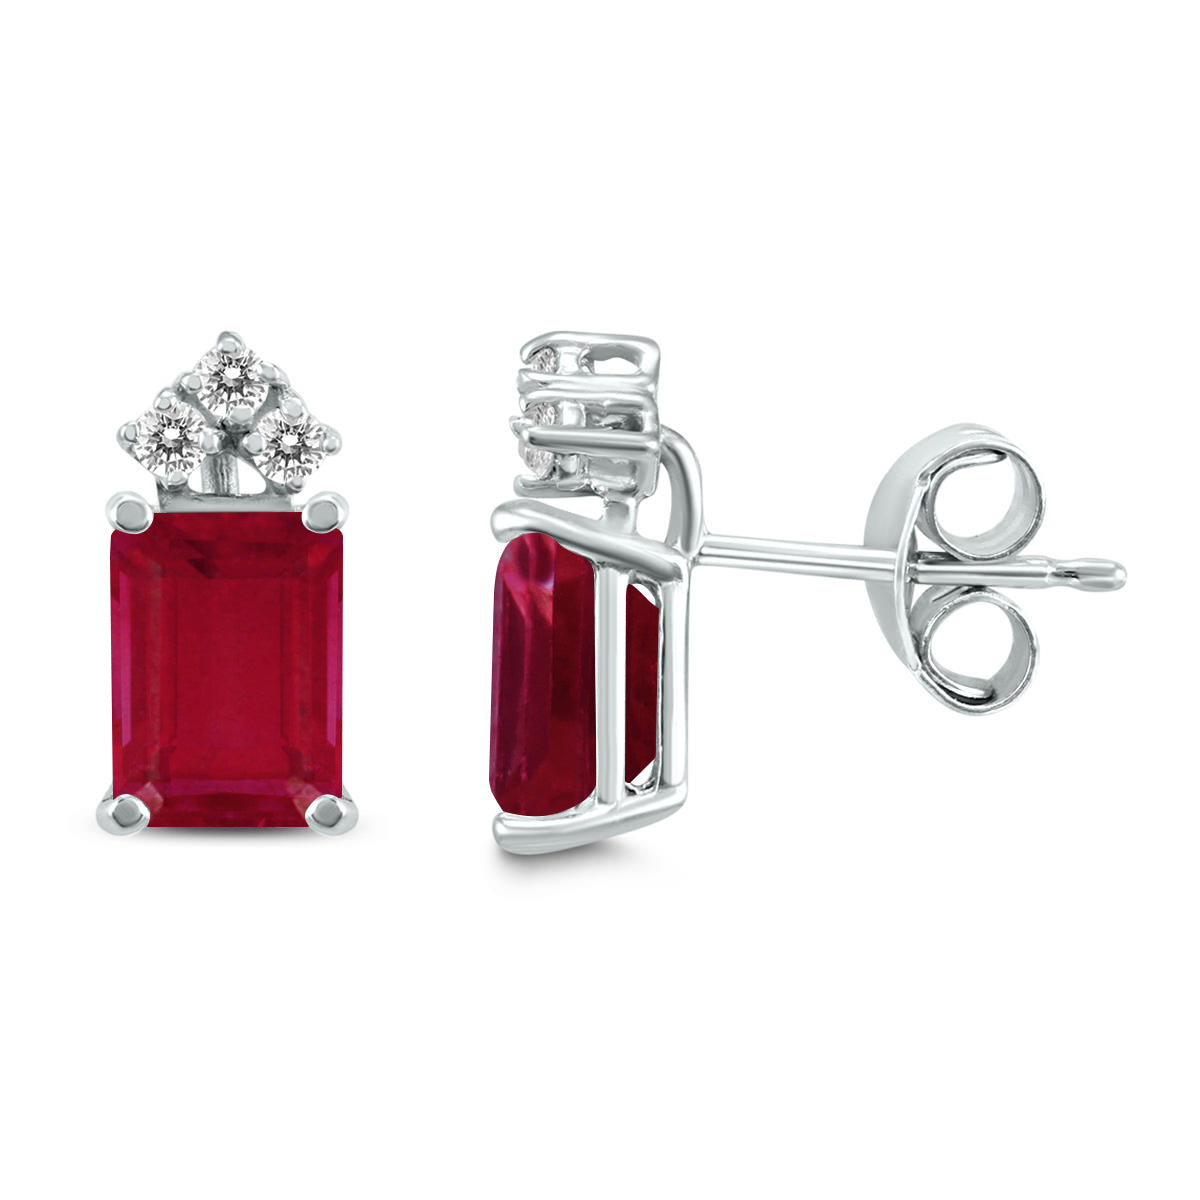 Sselects 14k 5x3mm Emerald Shaped Ruby And Three Stone Diamond Earrings In Burgundy